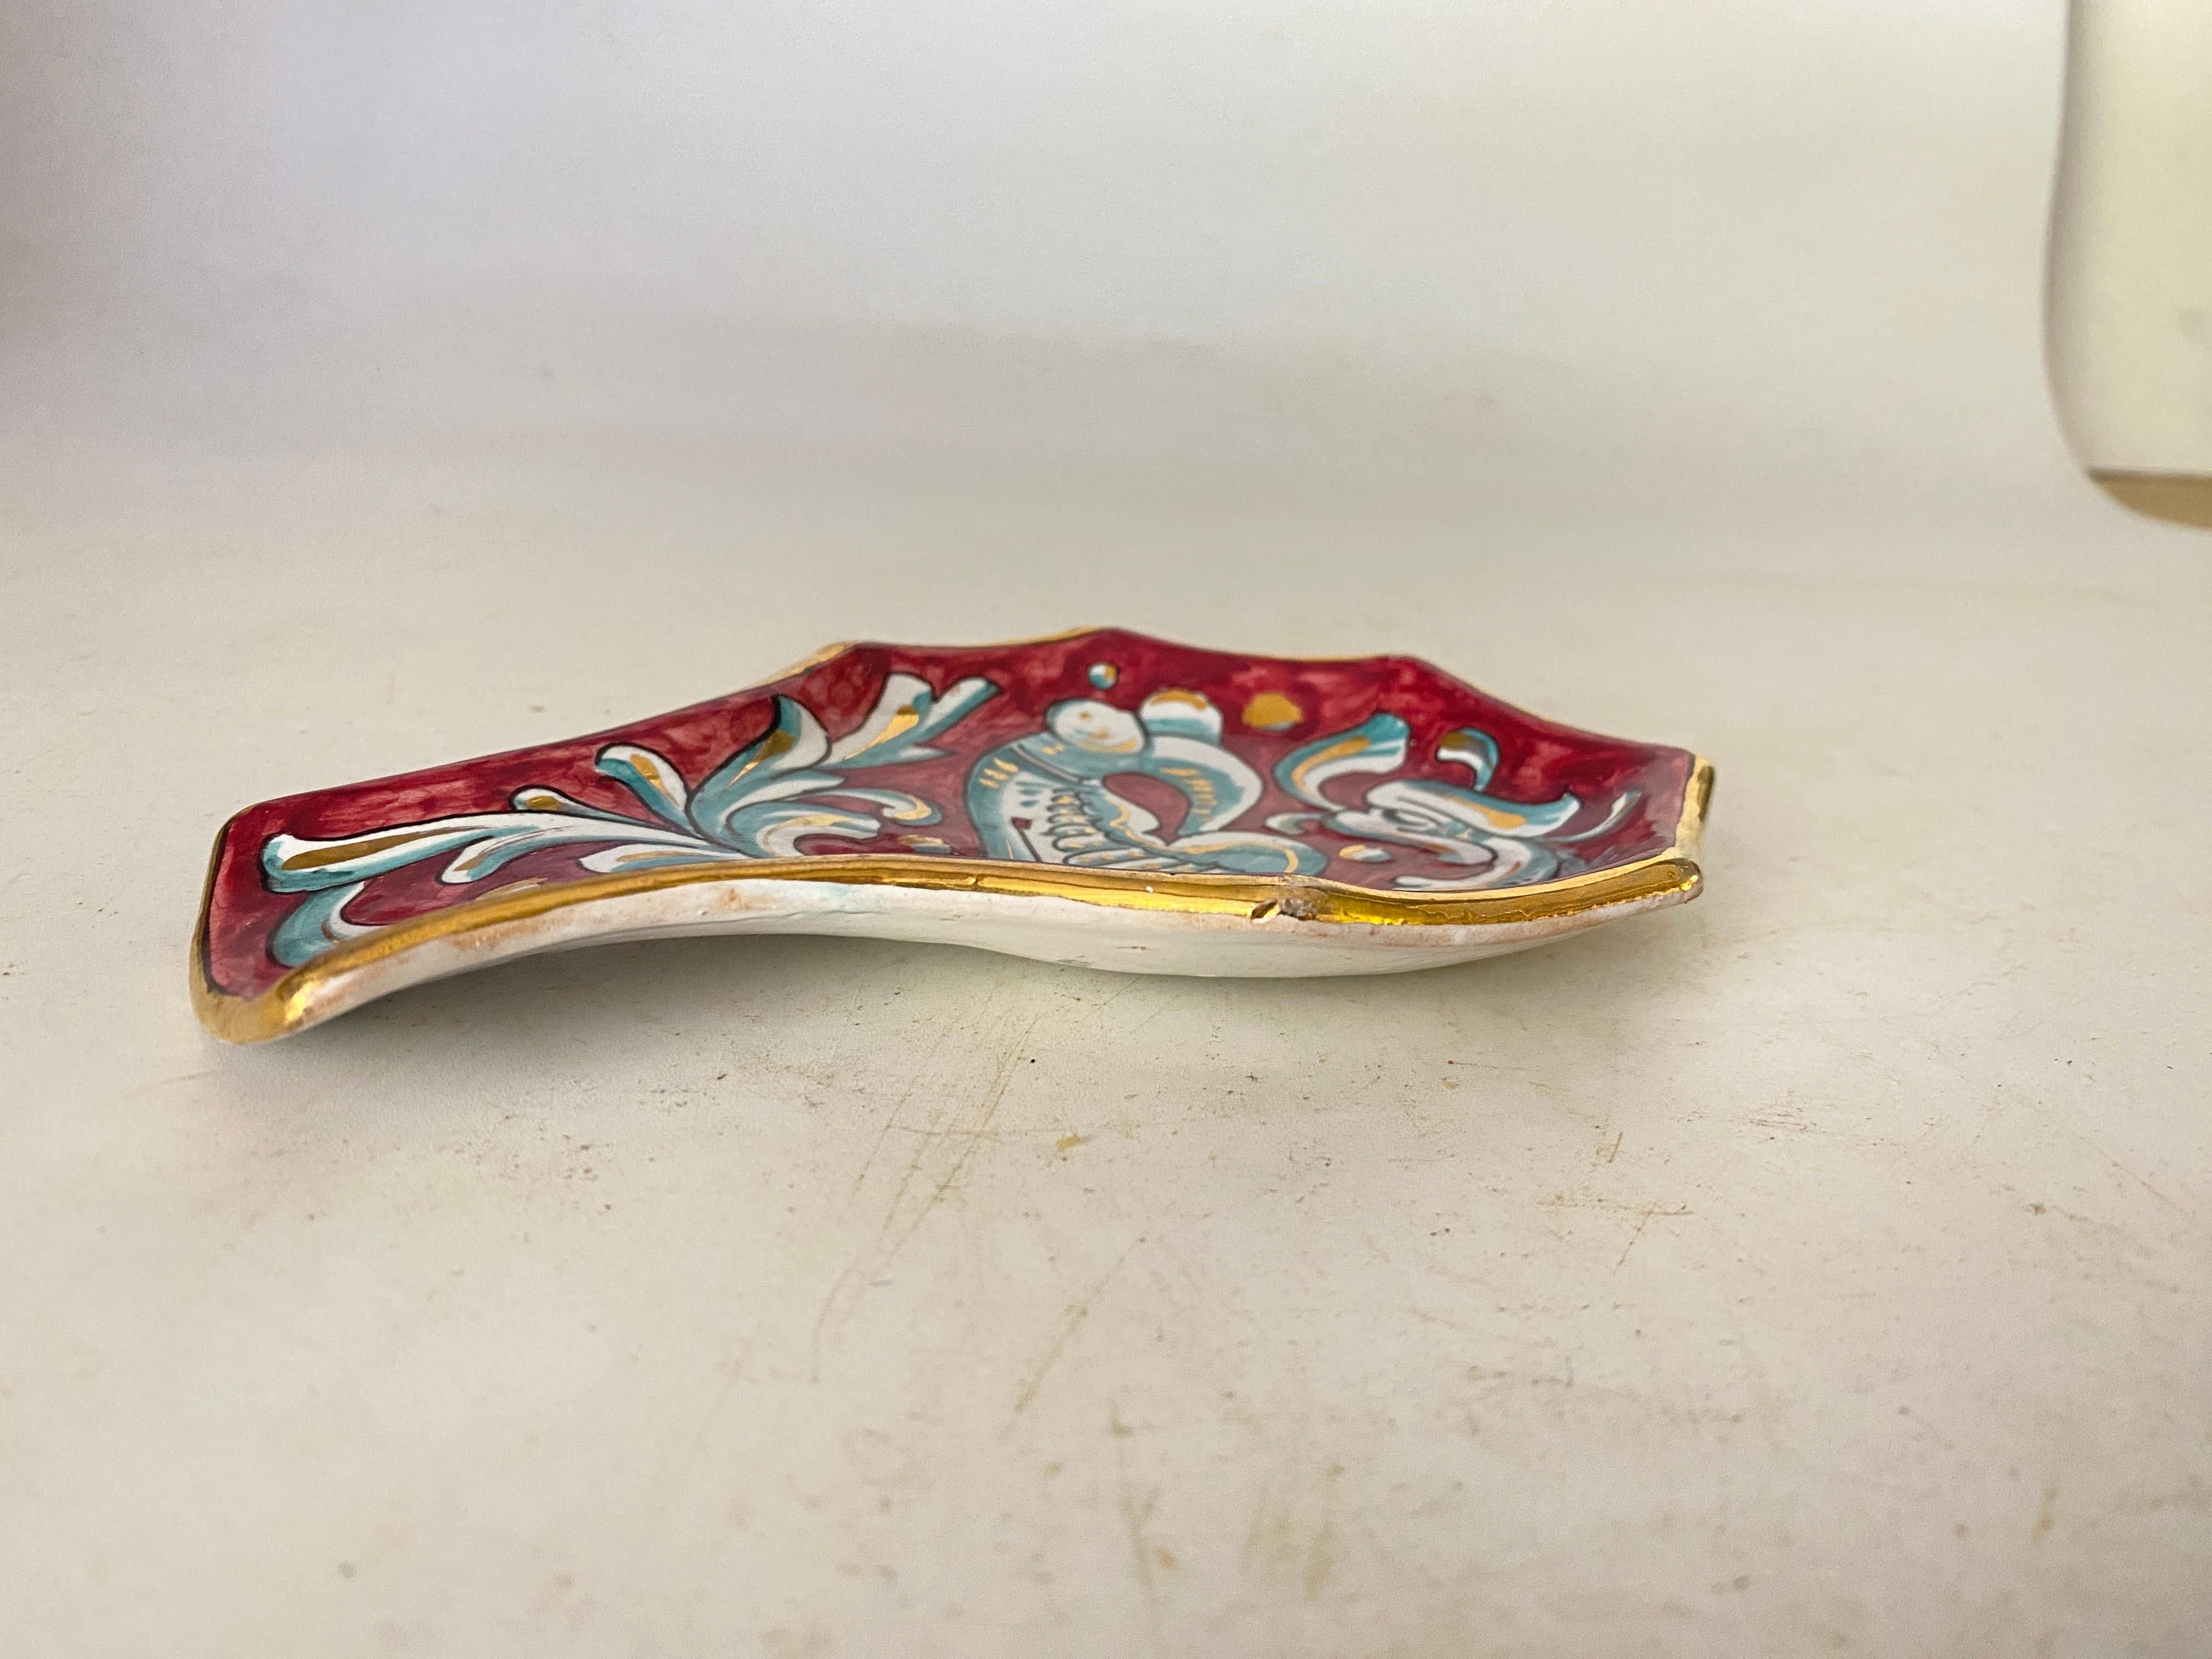 This Ceramic Ashtray or Vide Poche, has a shell Shape. The colors are the Red and white.
It has been made in Italy Circa 1960
